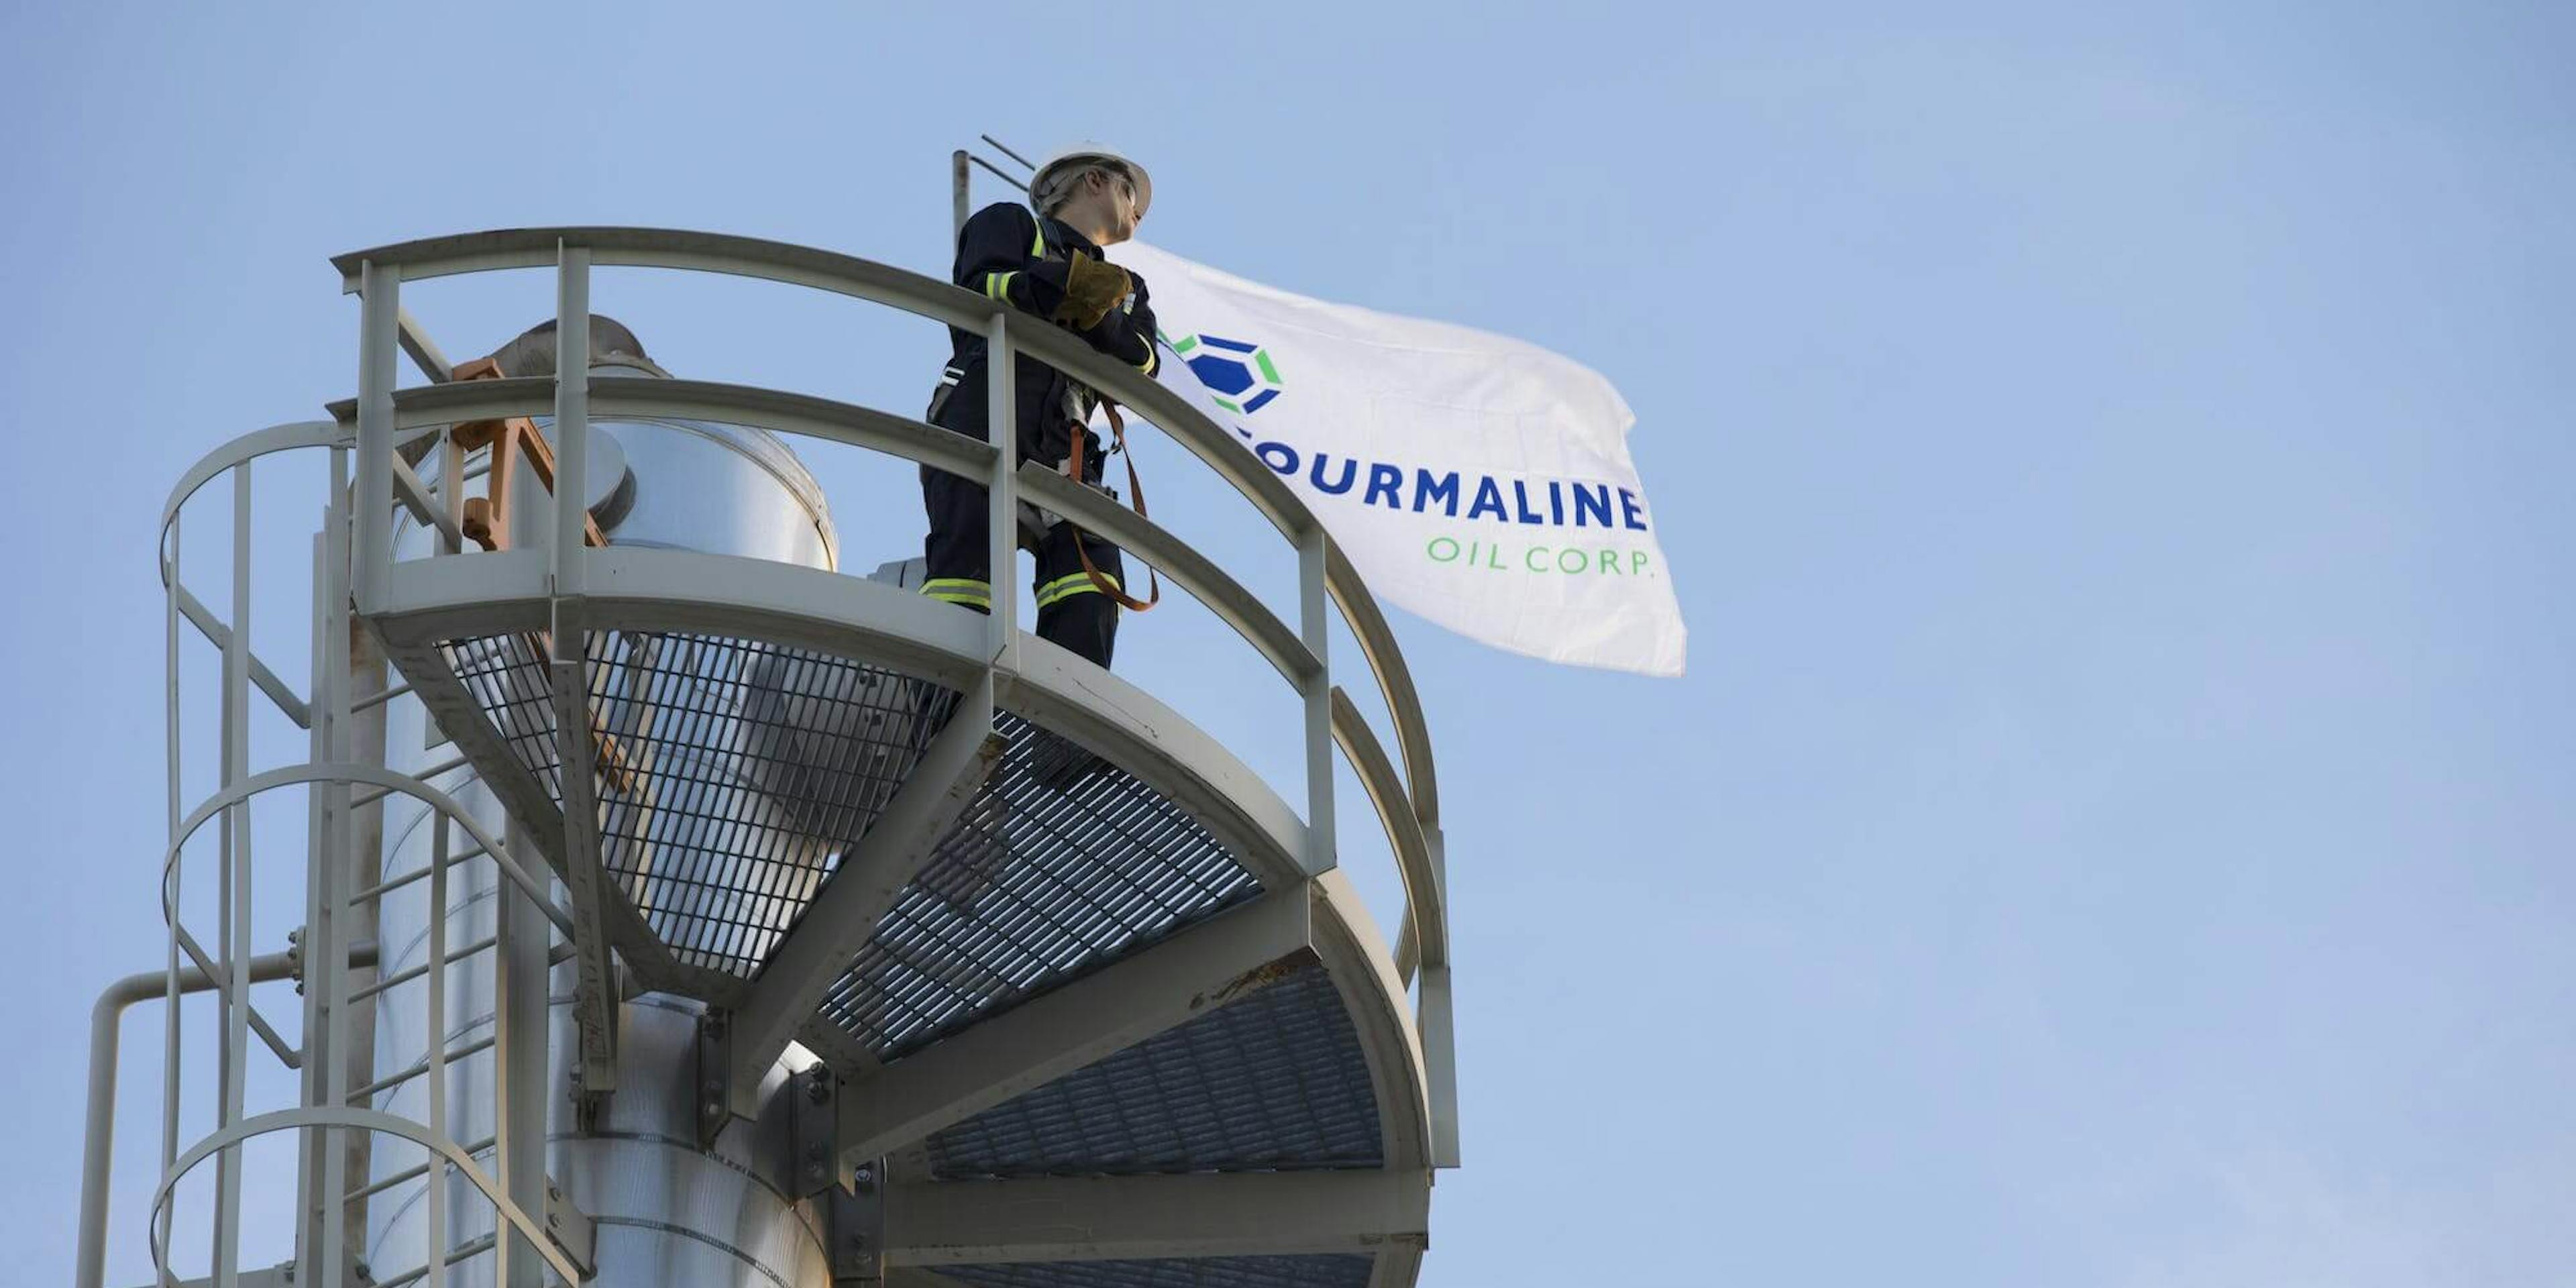 A worker at Tourmaline Oil Corp stands proudly next to the company's flag.